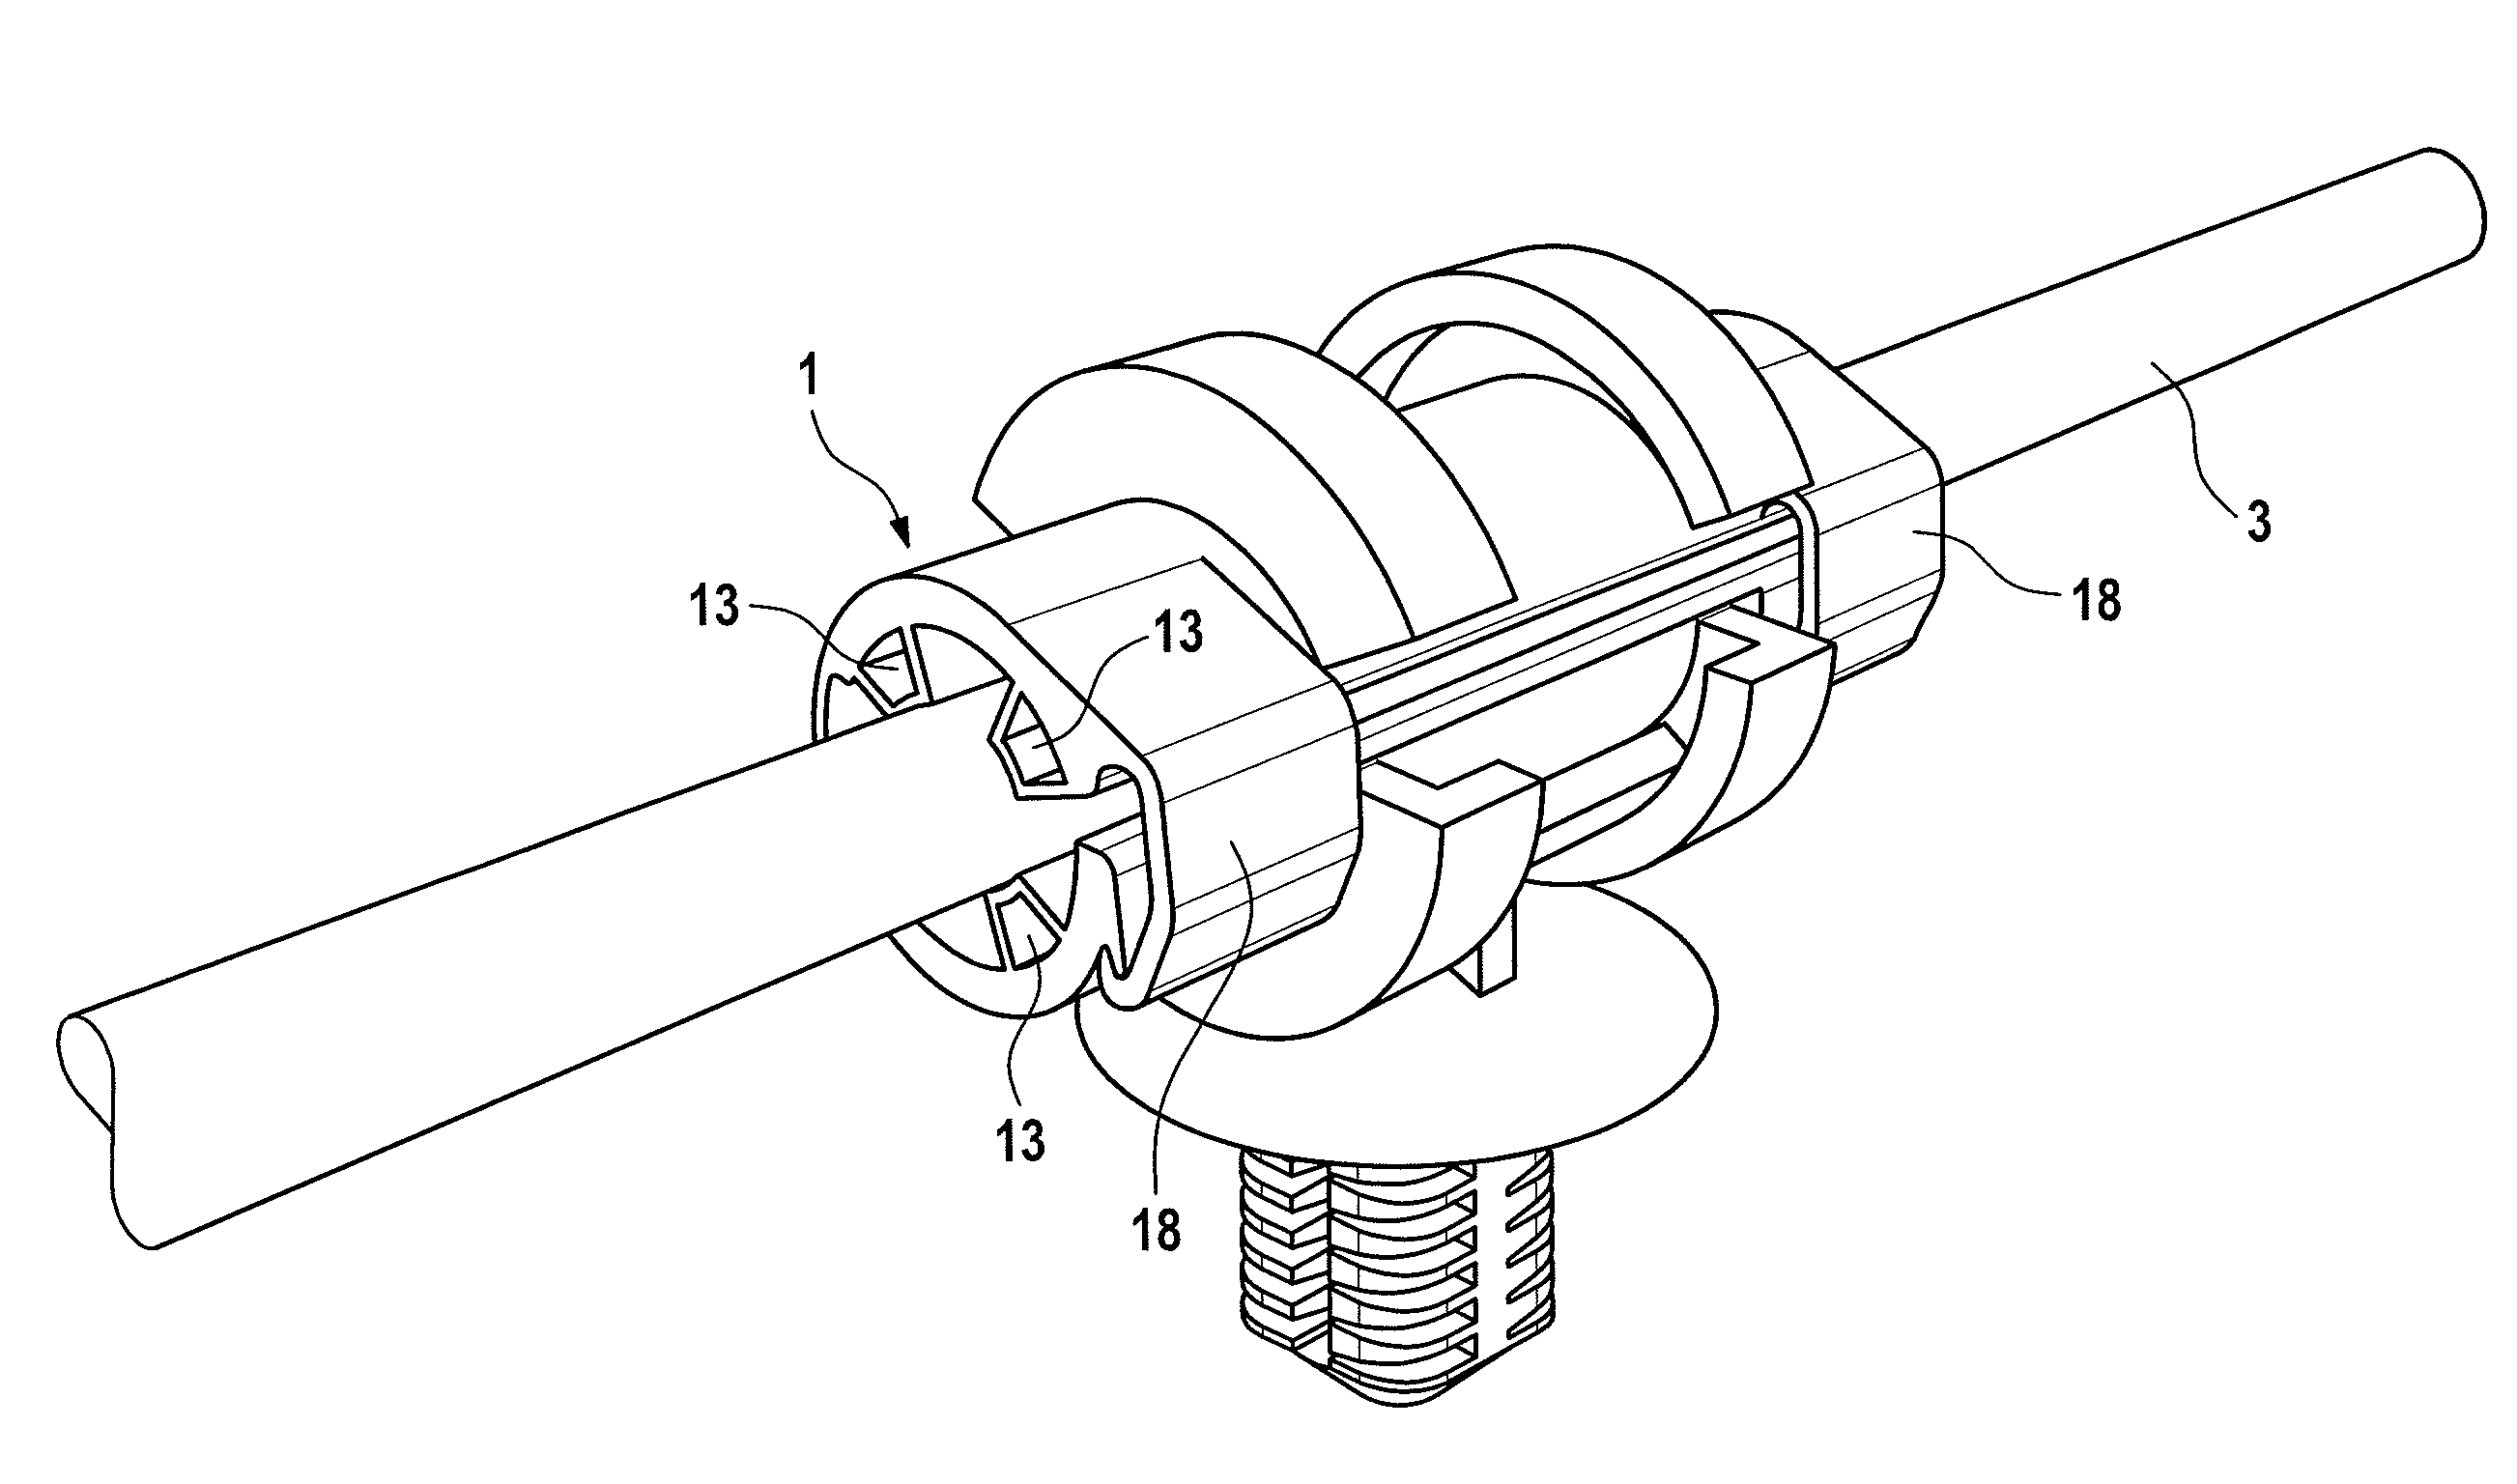 Fastening device for fixing a cable